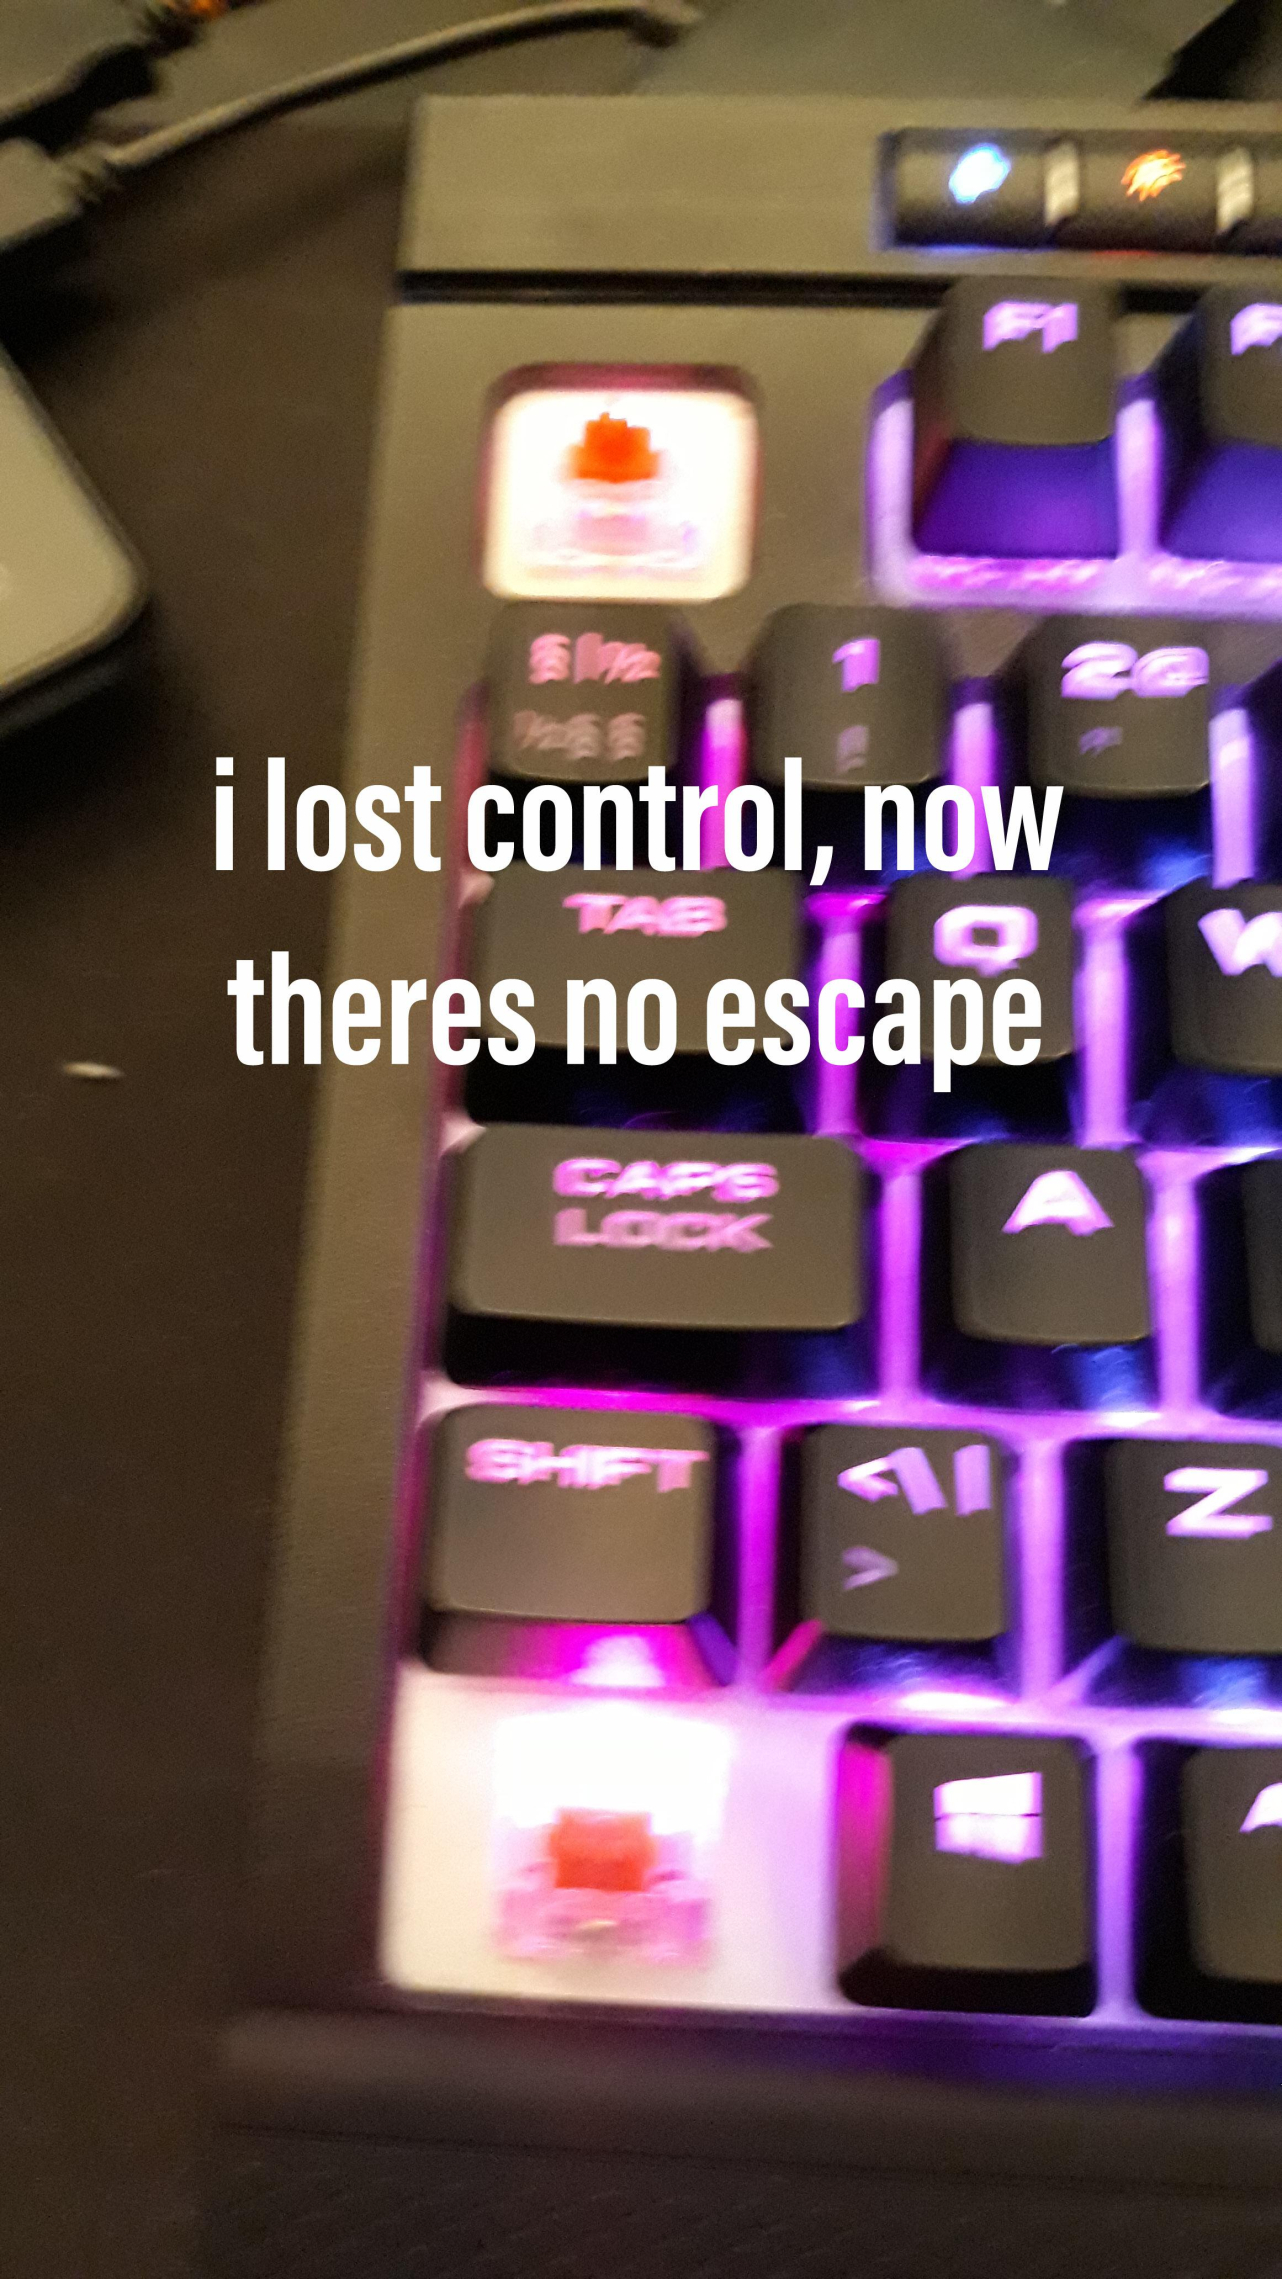 lost control now theres no escape keyboard meme - i lost control, now theres no escape z